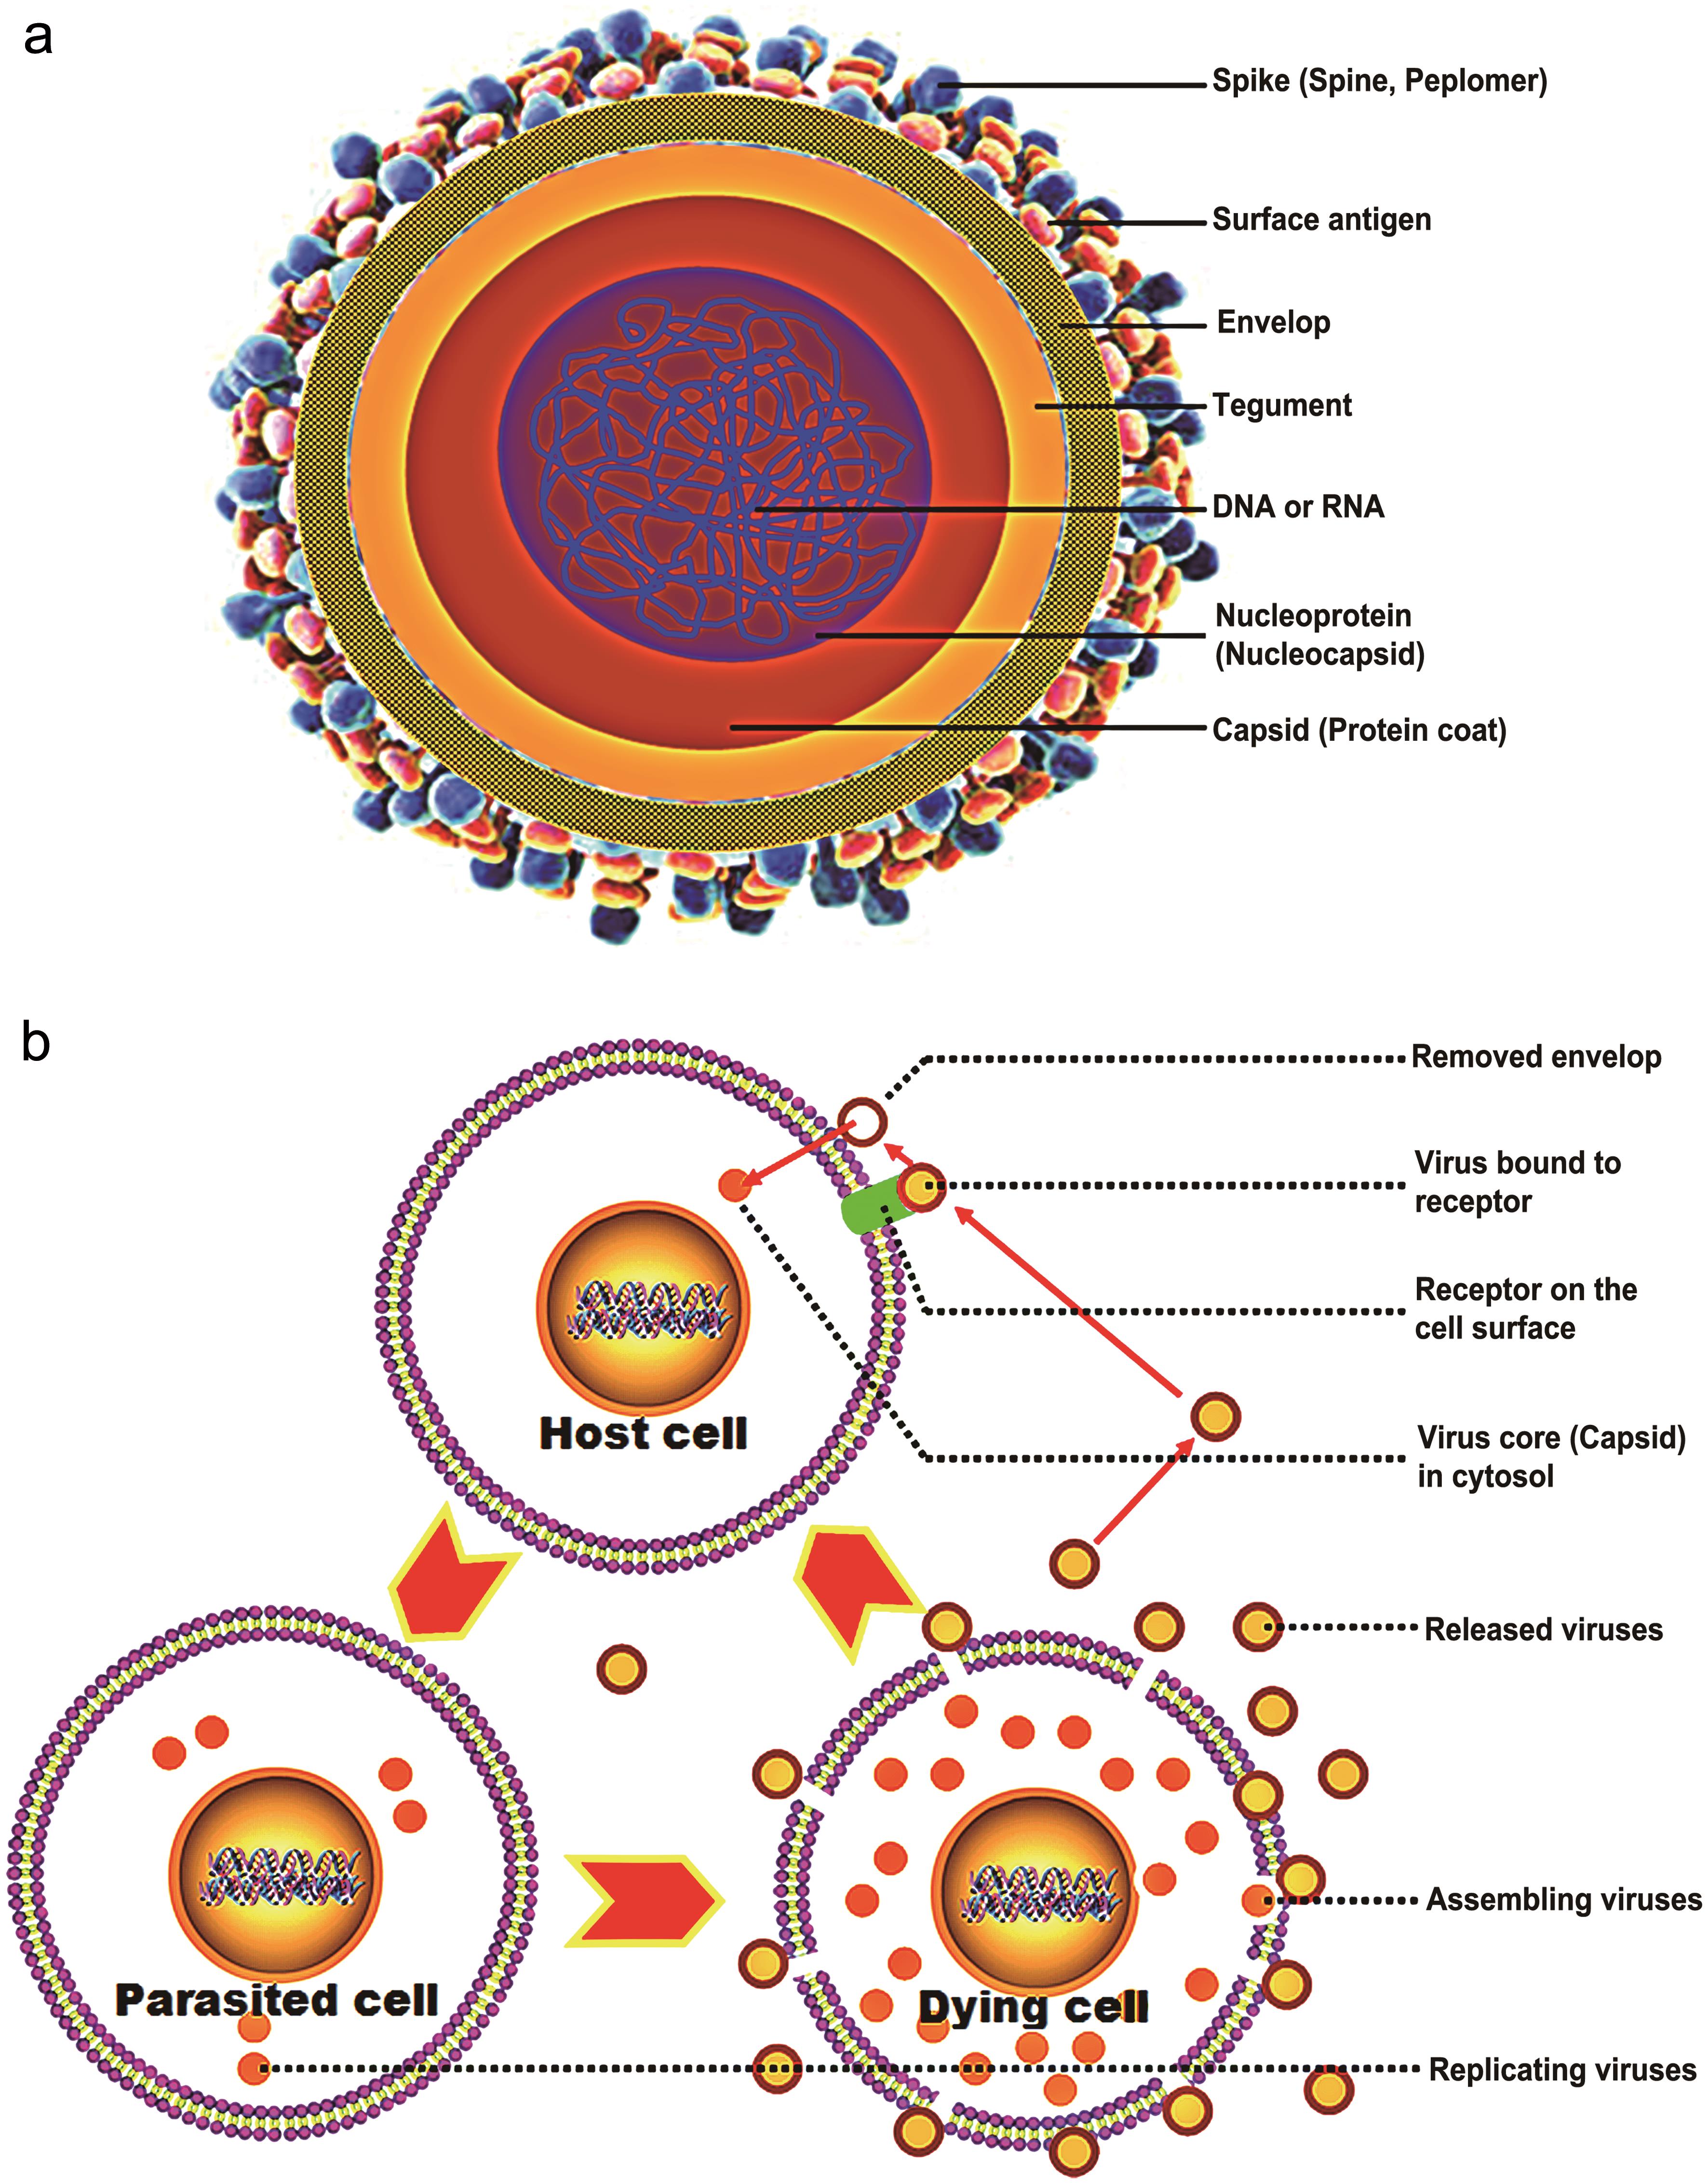 Virus structure and life cycle.